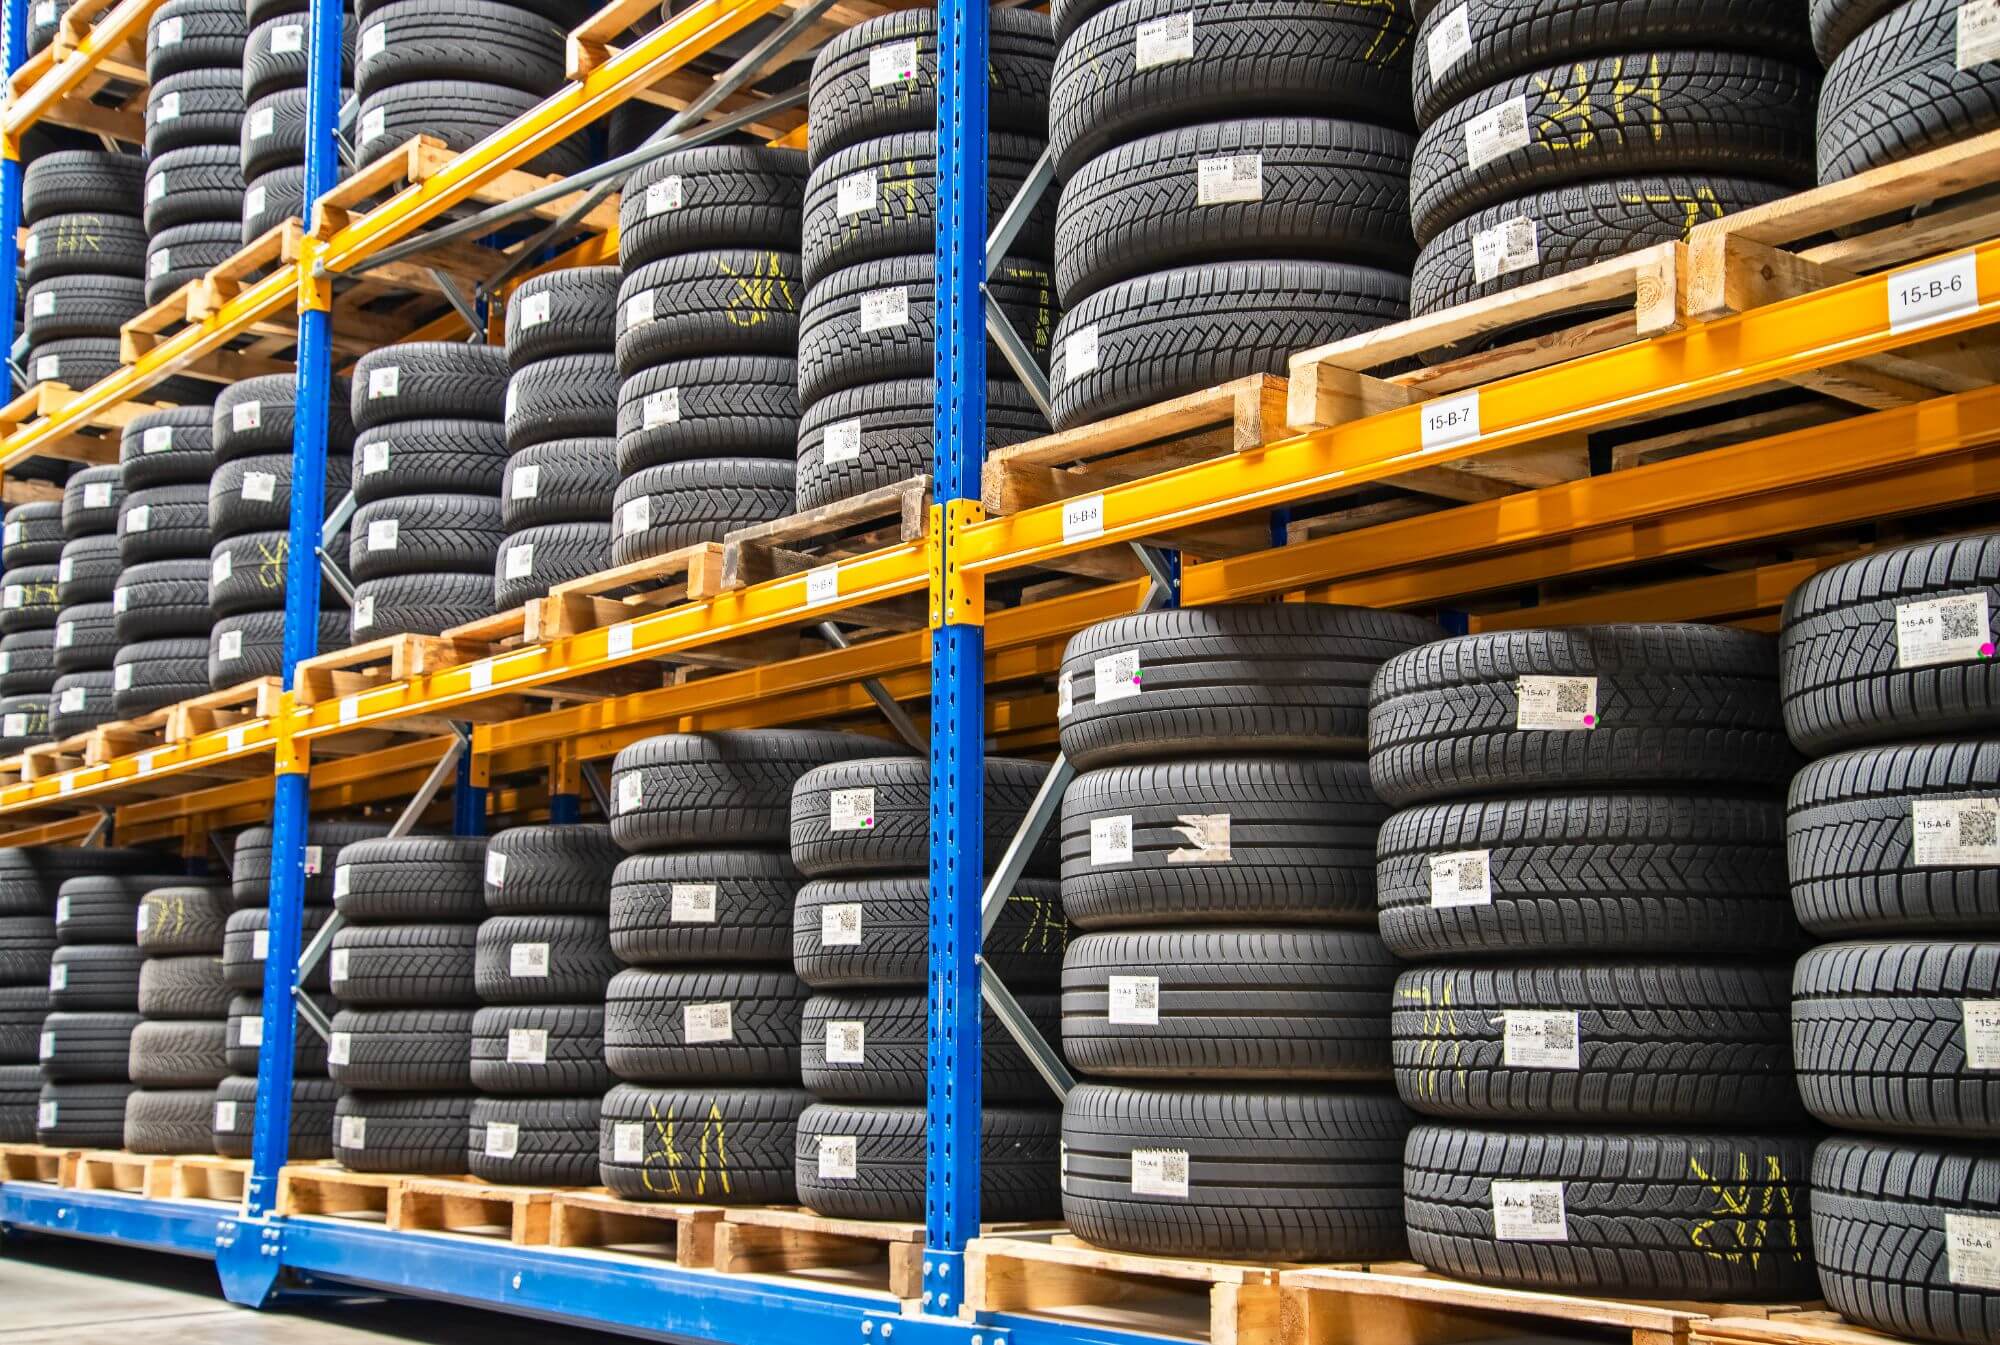 Stacks of new tires in a warehouse